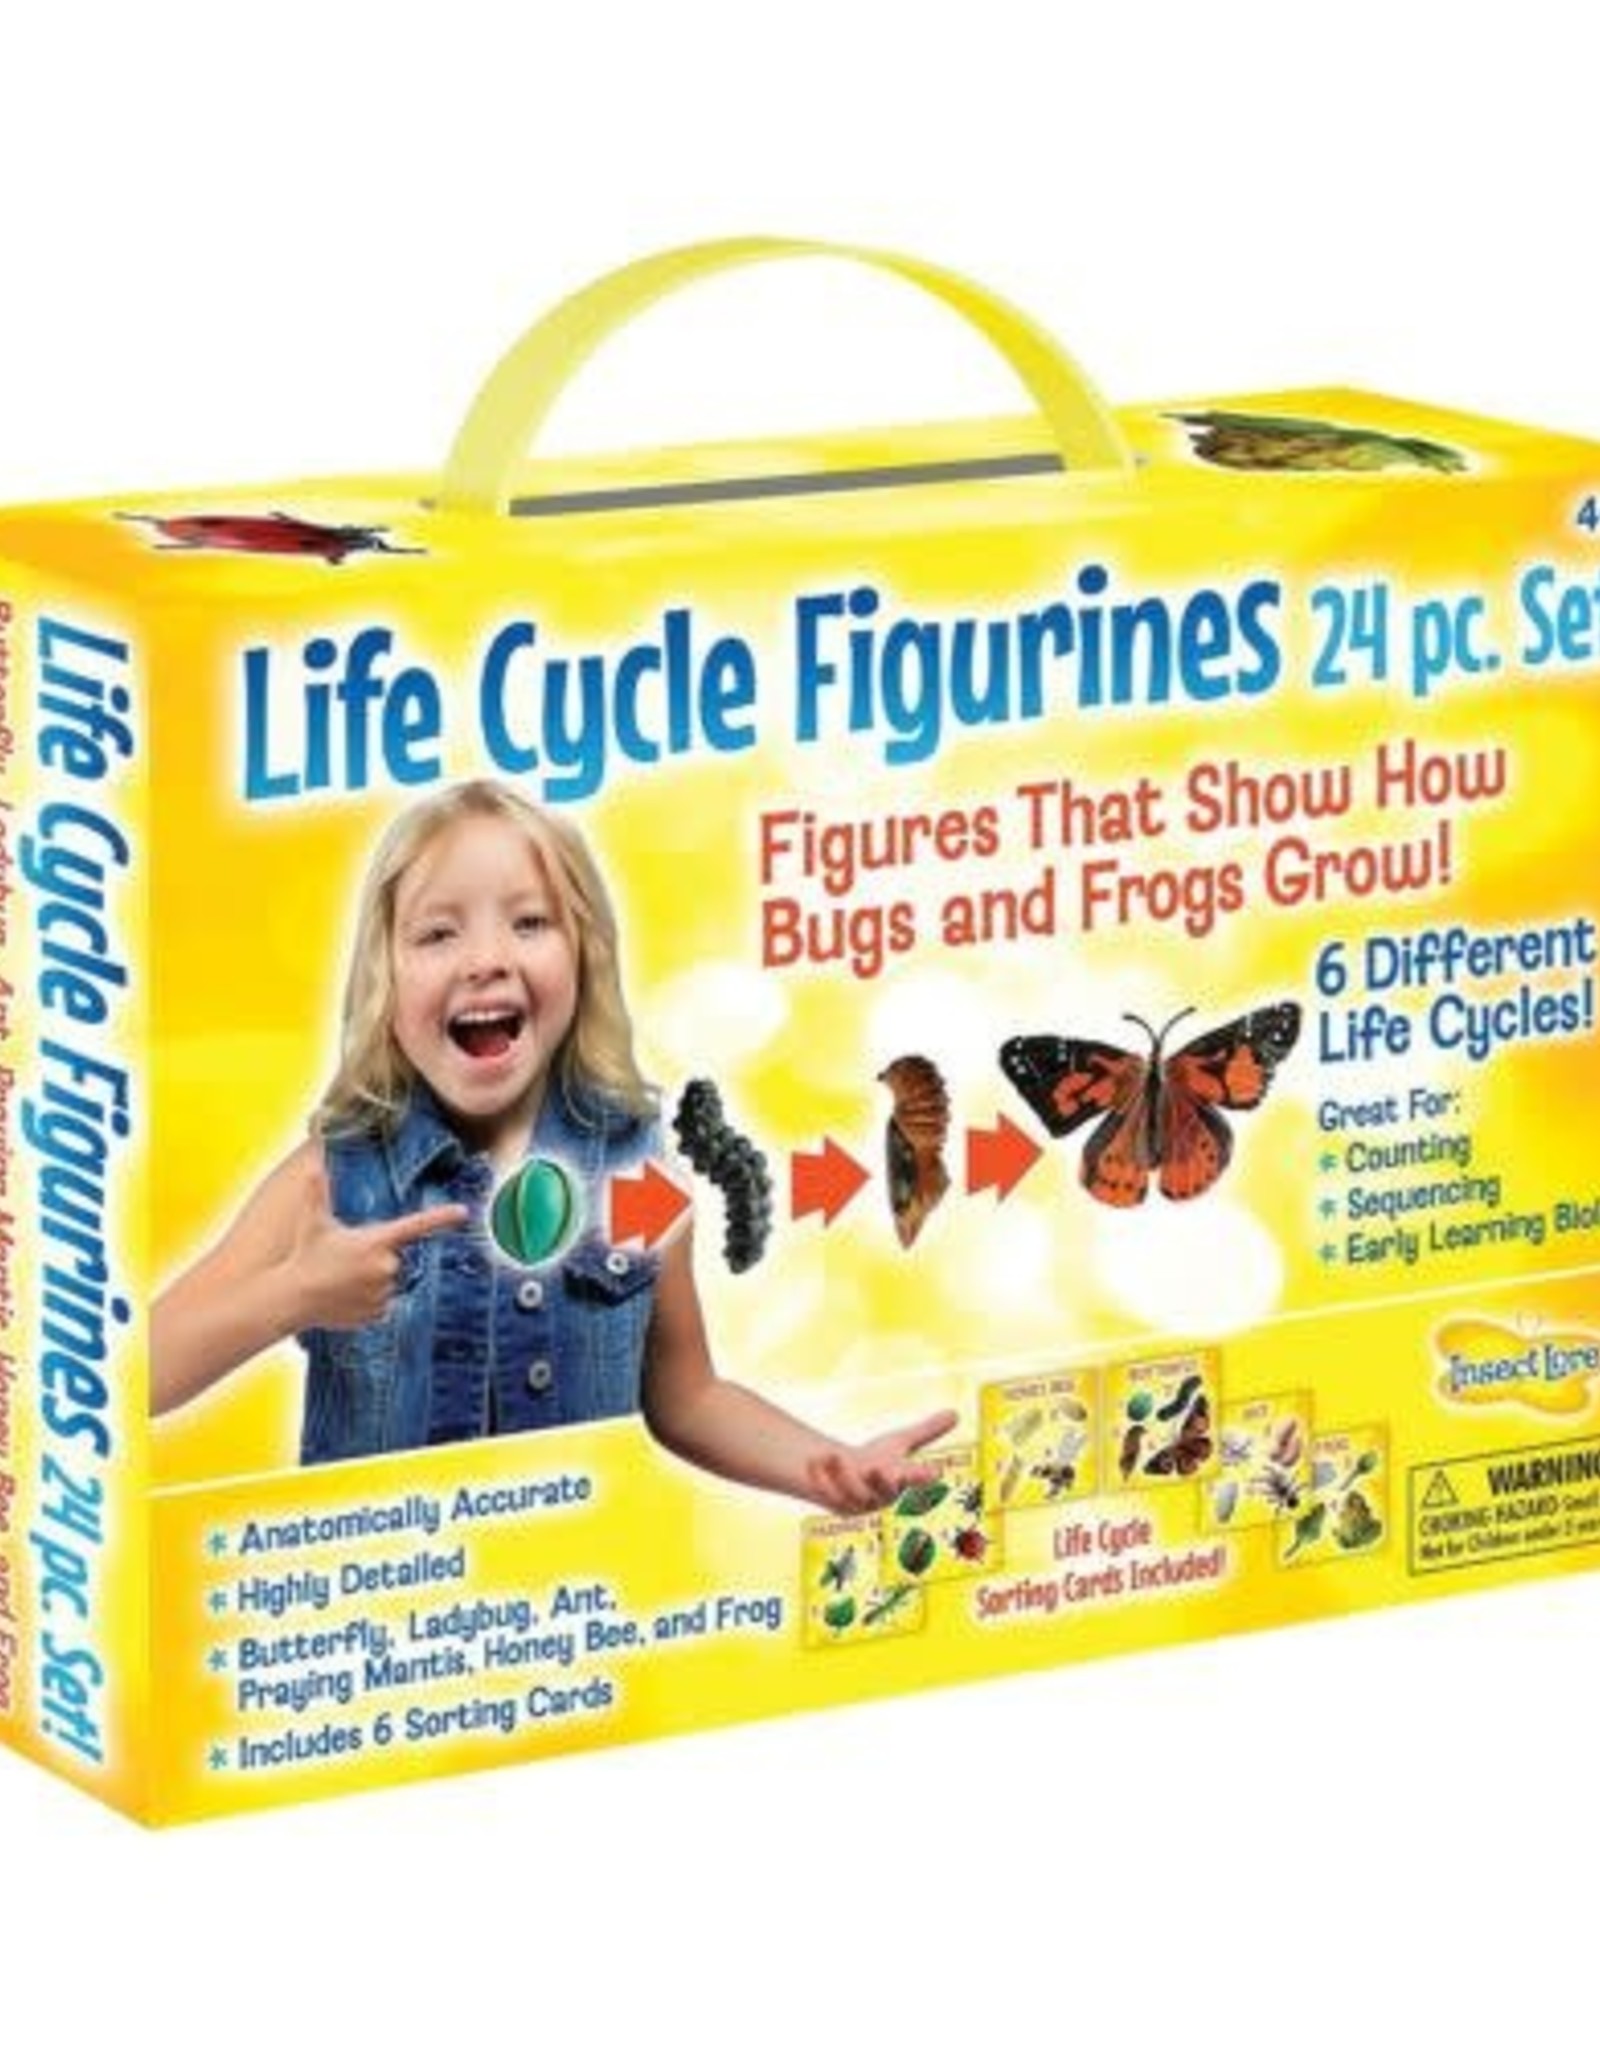 INSECT LORE LIFE CYCLE FIGURINES 24 PC